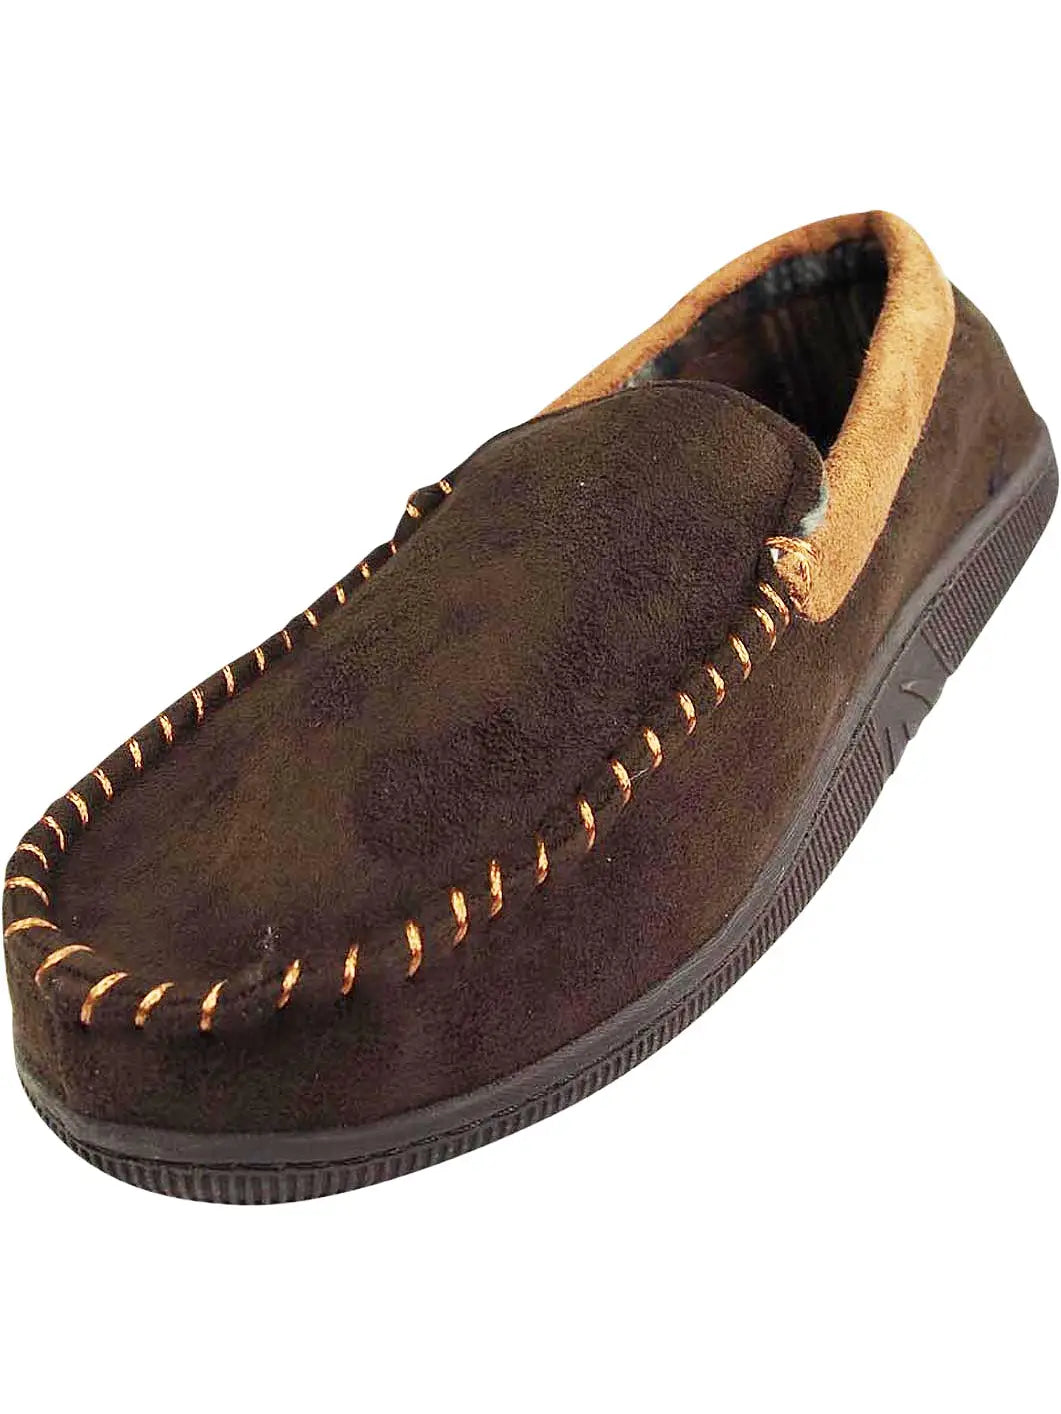 Moccasin Loafer Slippers